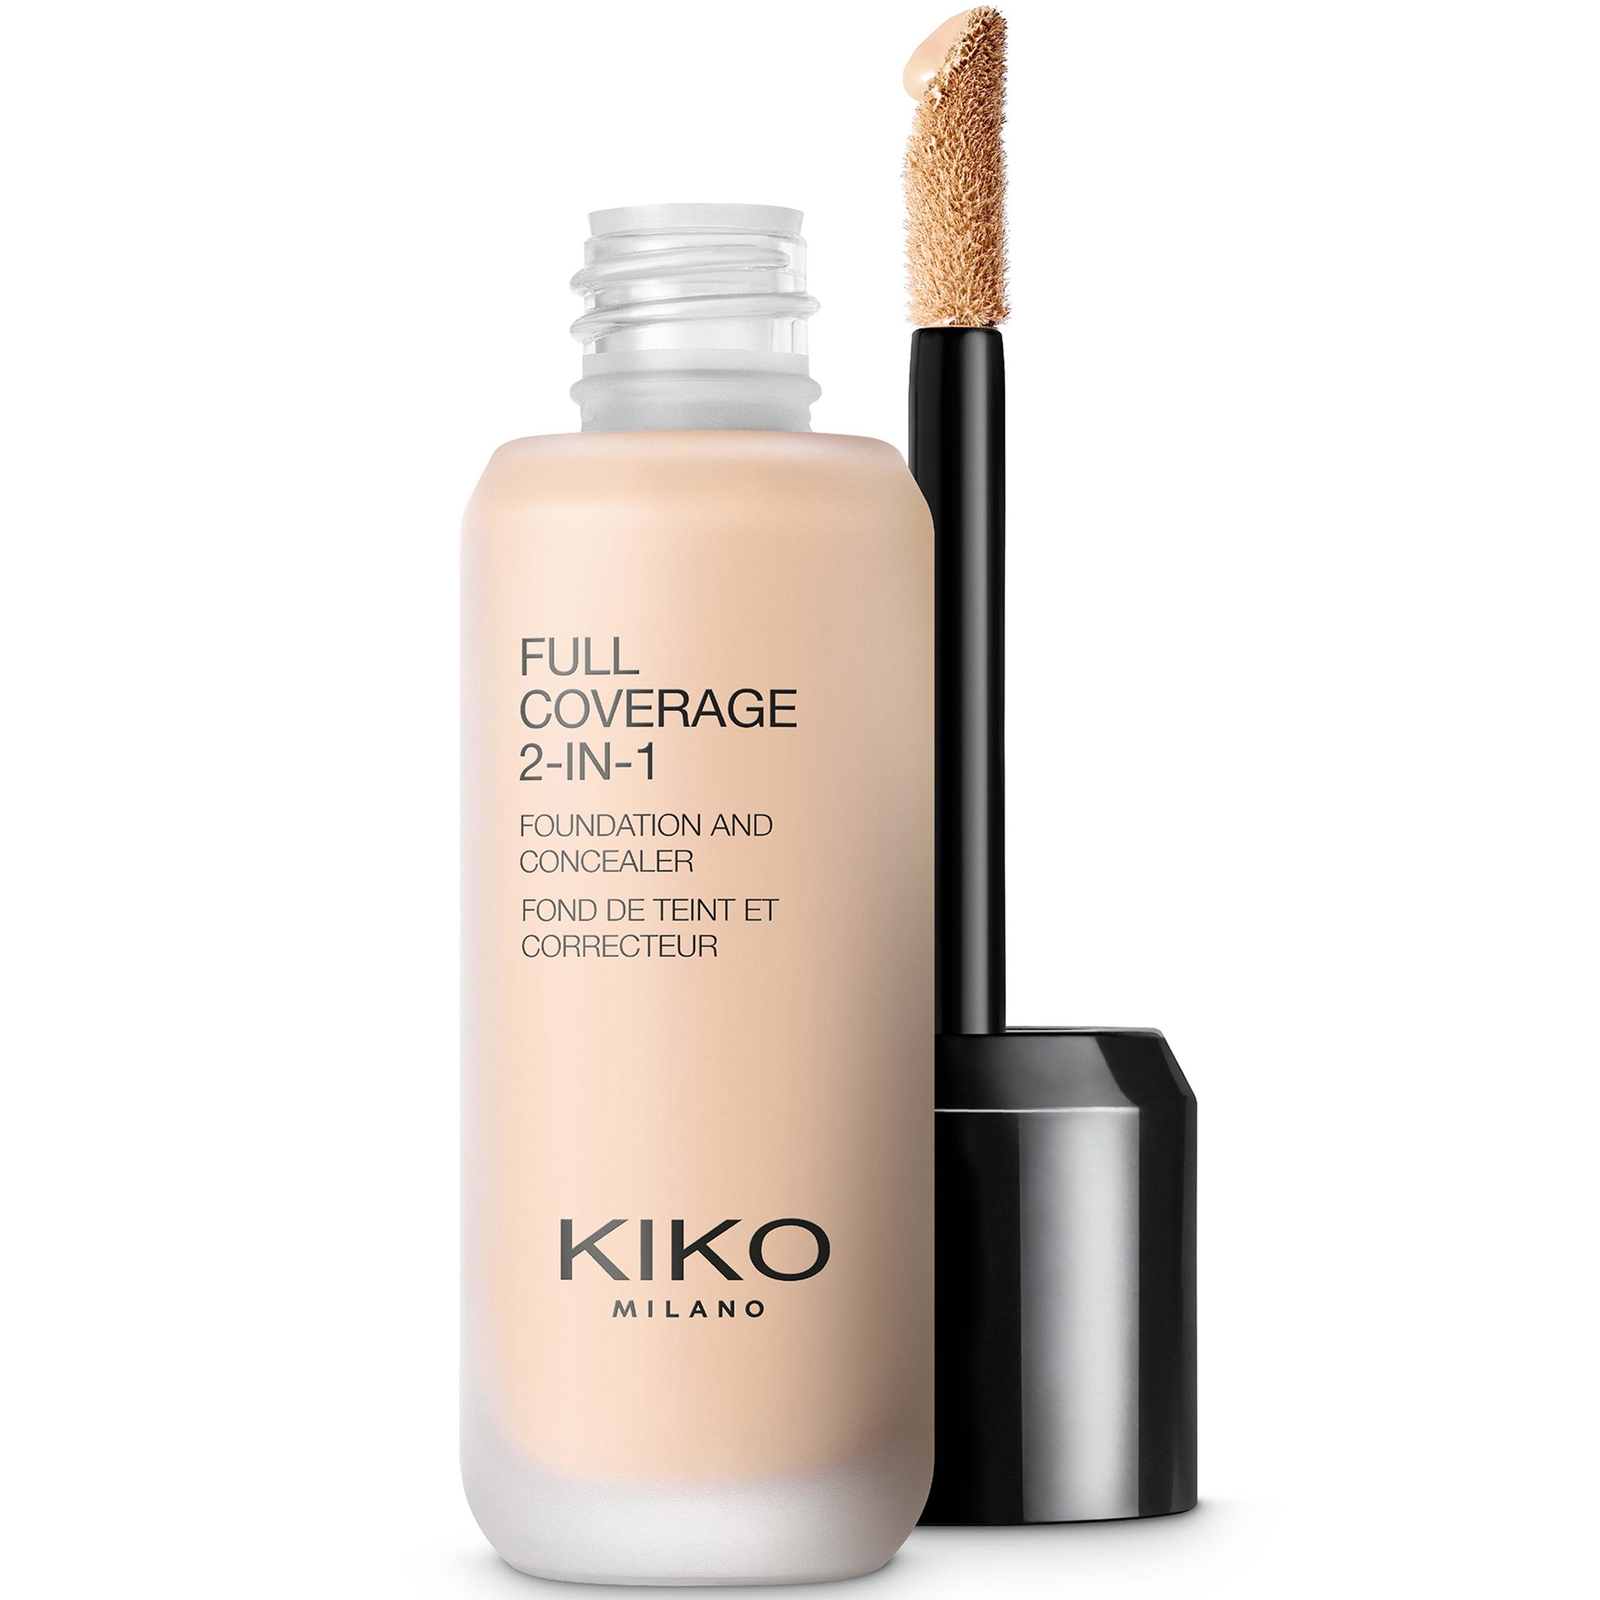 Image of KIKO Milano Full Coverage 2-in-1 Foundation and Concealer 25ml (Various Shades) - 01 Warm Rose